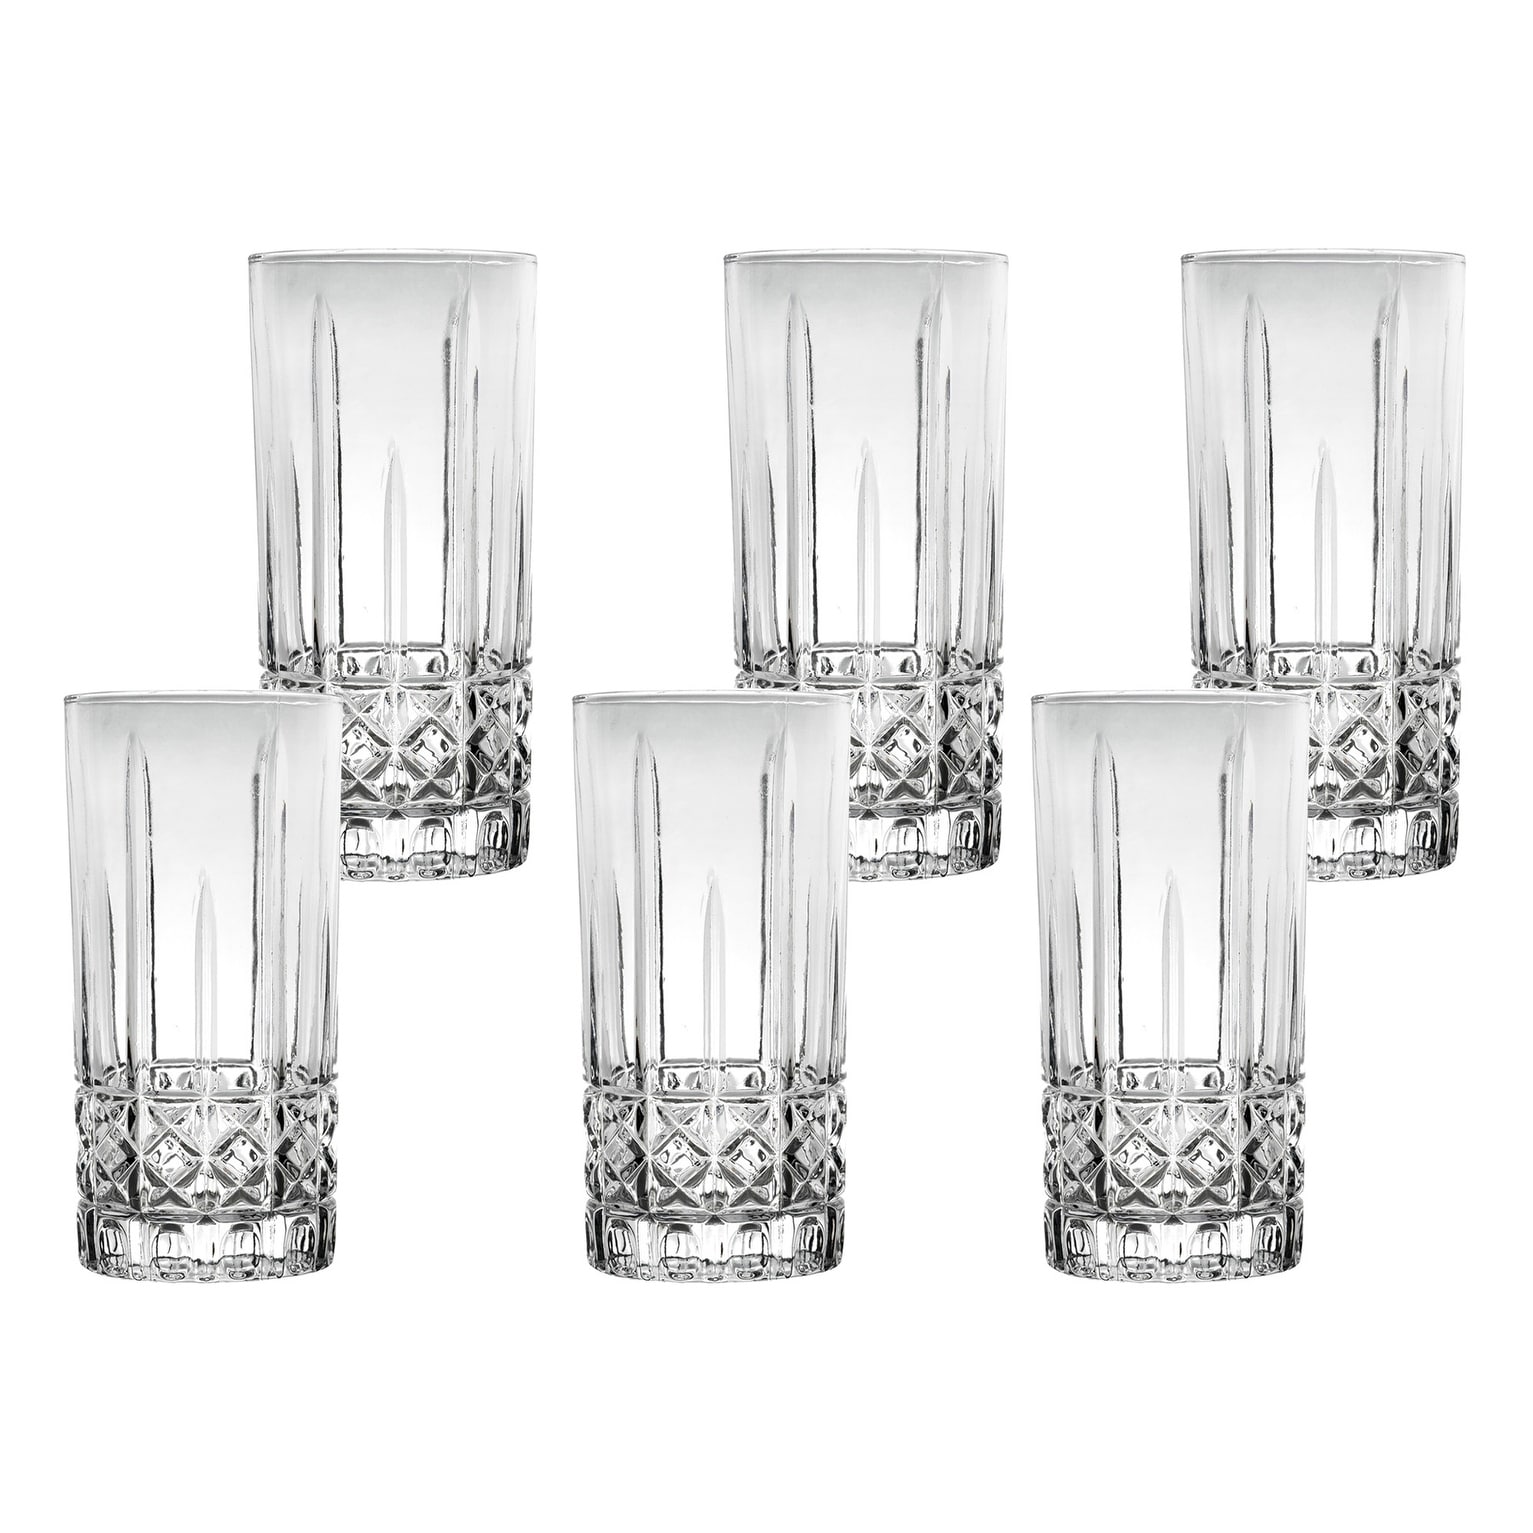 https://ak1.ostkcdn.com/images/products/is/images/direct/524c72112afa452a0a8143783362862099686e24/Lorren-Home-Trends-12-OZ.-Drinking-Glass-Textured-Cut-Glass%2C-Set-of-6.jpg